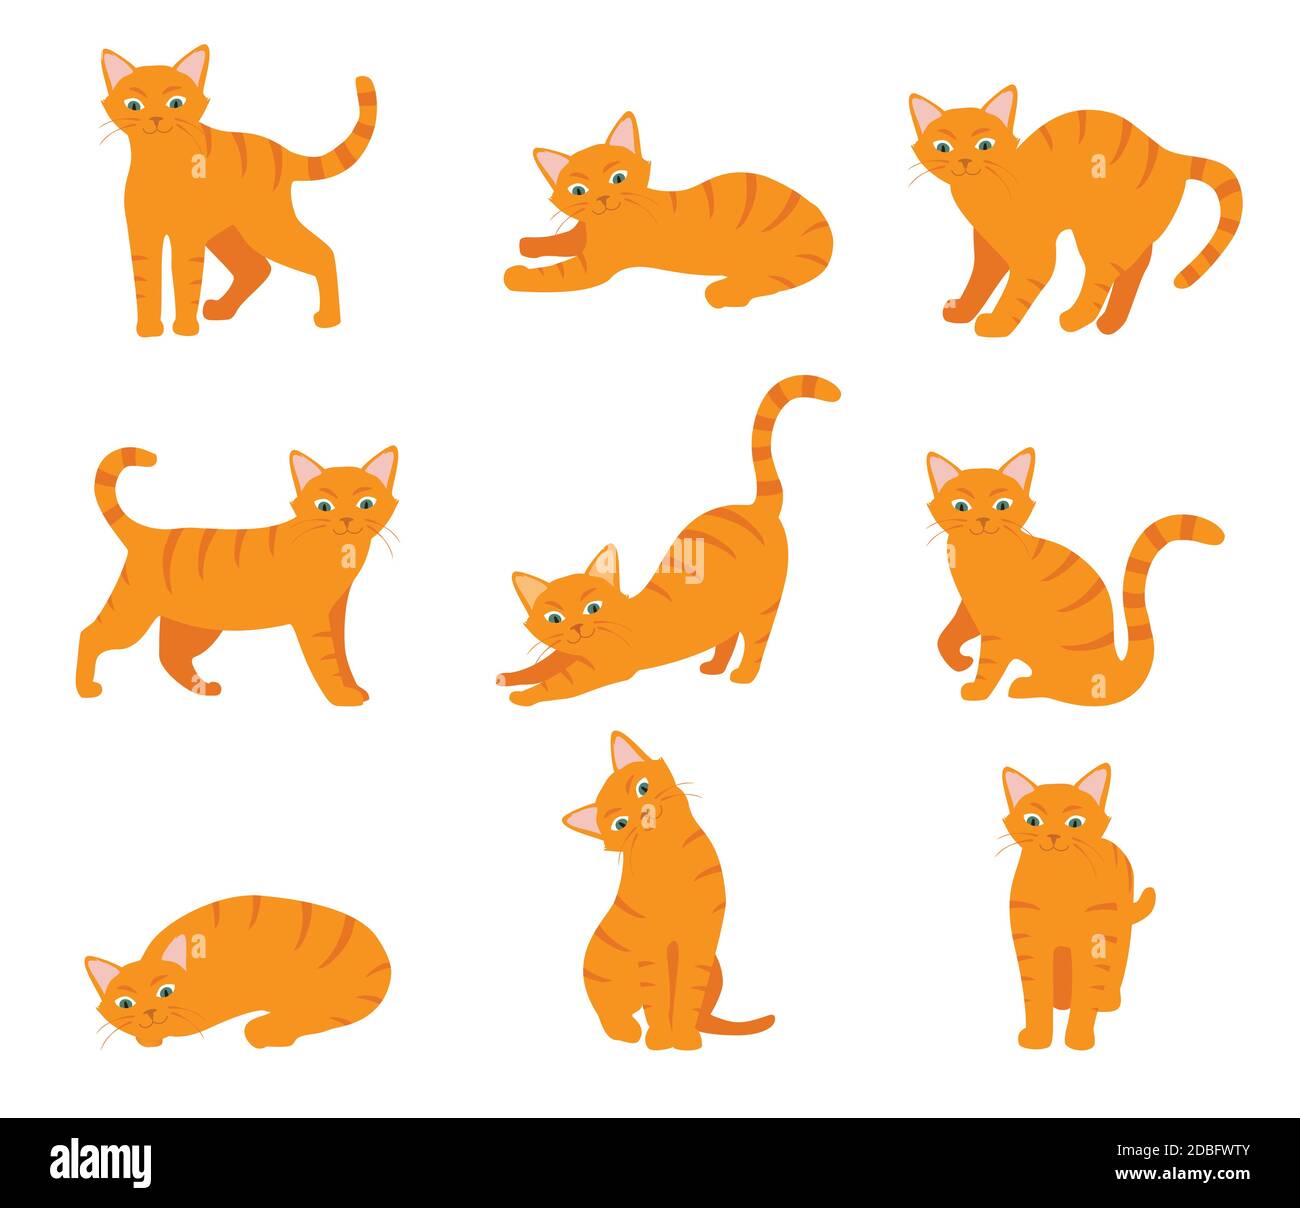 Cartoon cat set with different poses and emotions. Cat behavior and body language. Ginger kitty in simple style, isolated vector illustration. Stock Vector